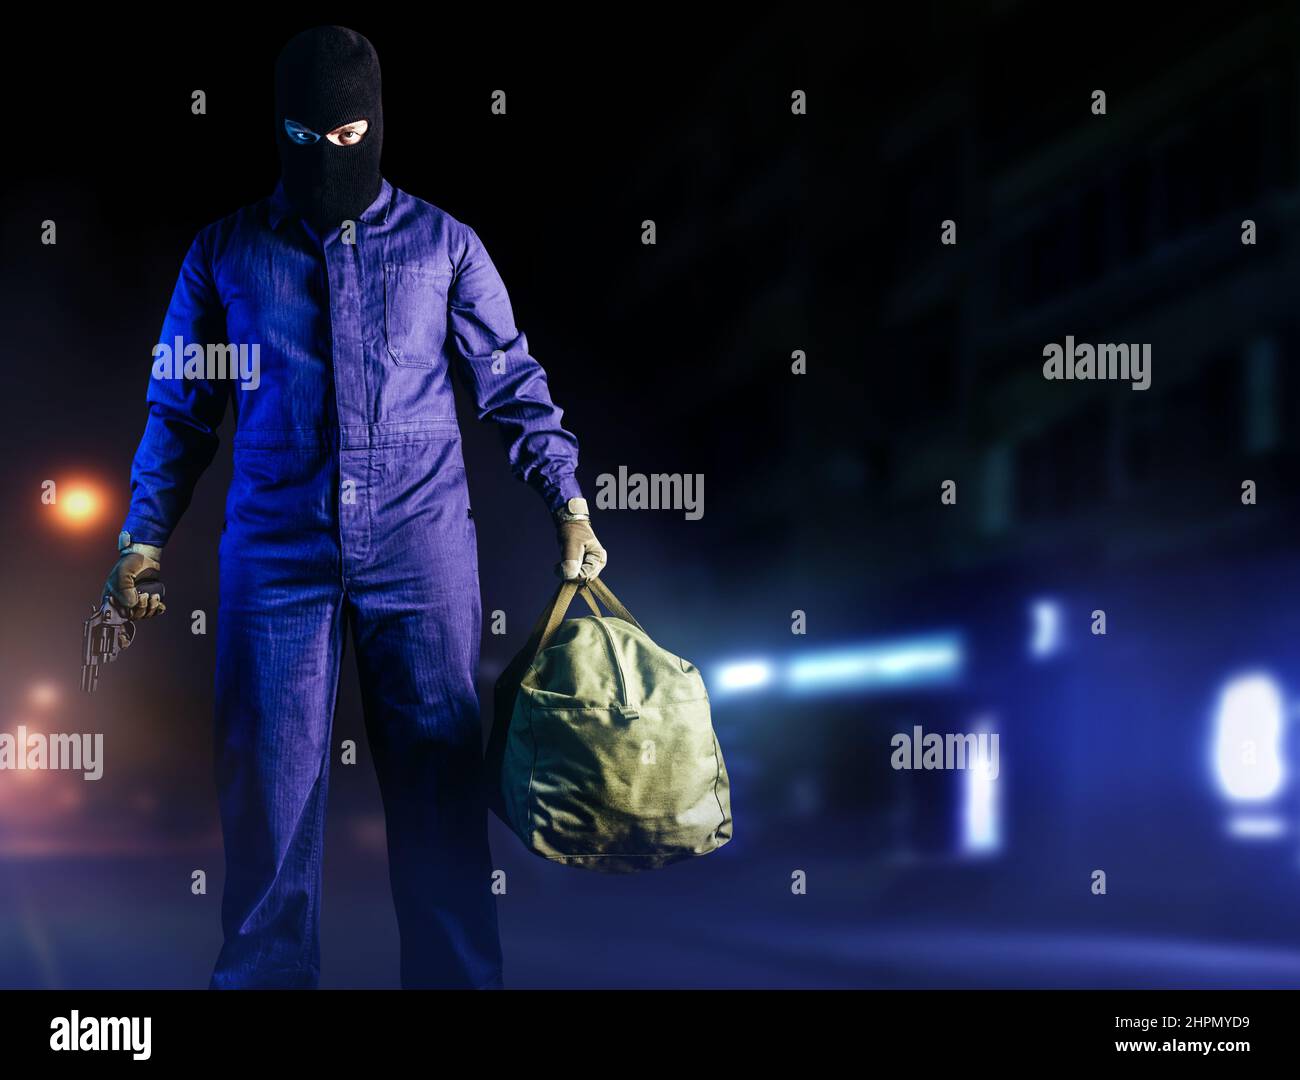 Photo of robber in mask, overalls, gloves, bag and gun standing front view on night street background. Stock Photo